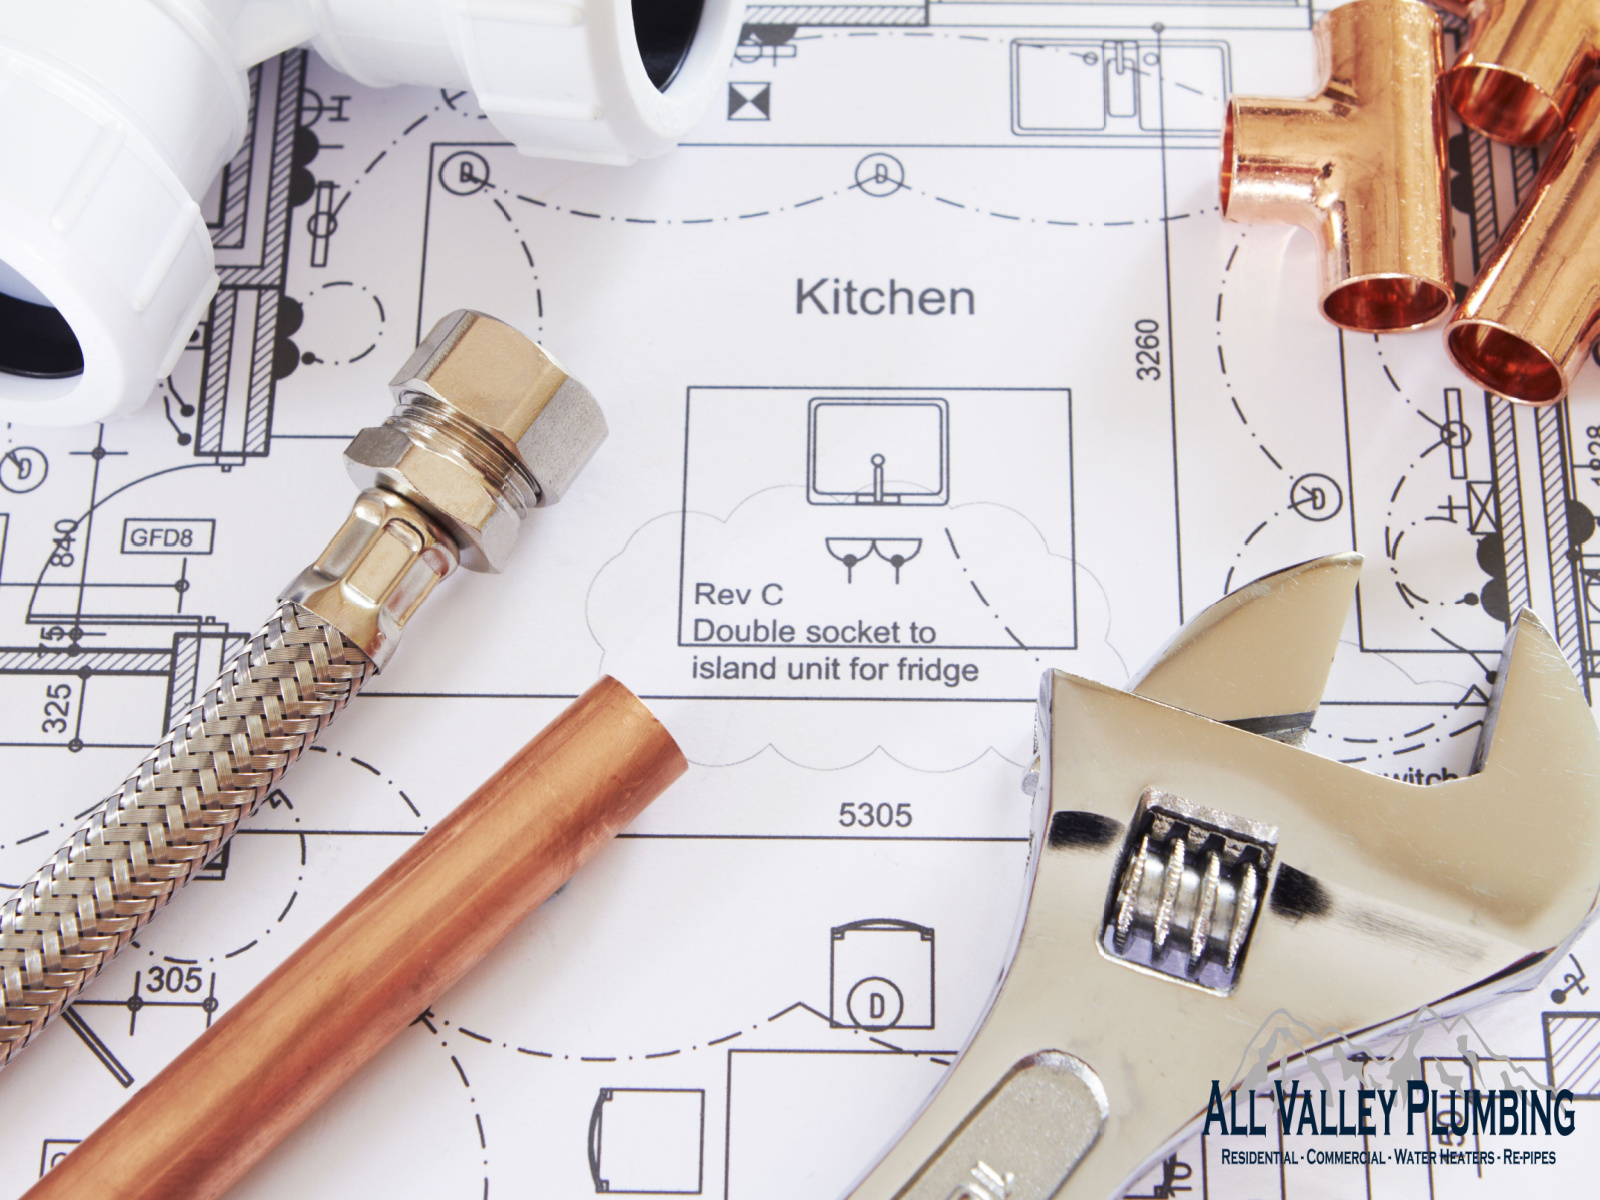 Everett Area Plumbing Services You Can Count On